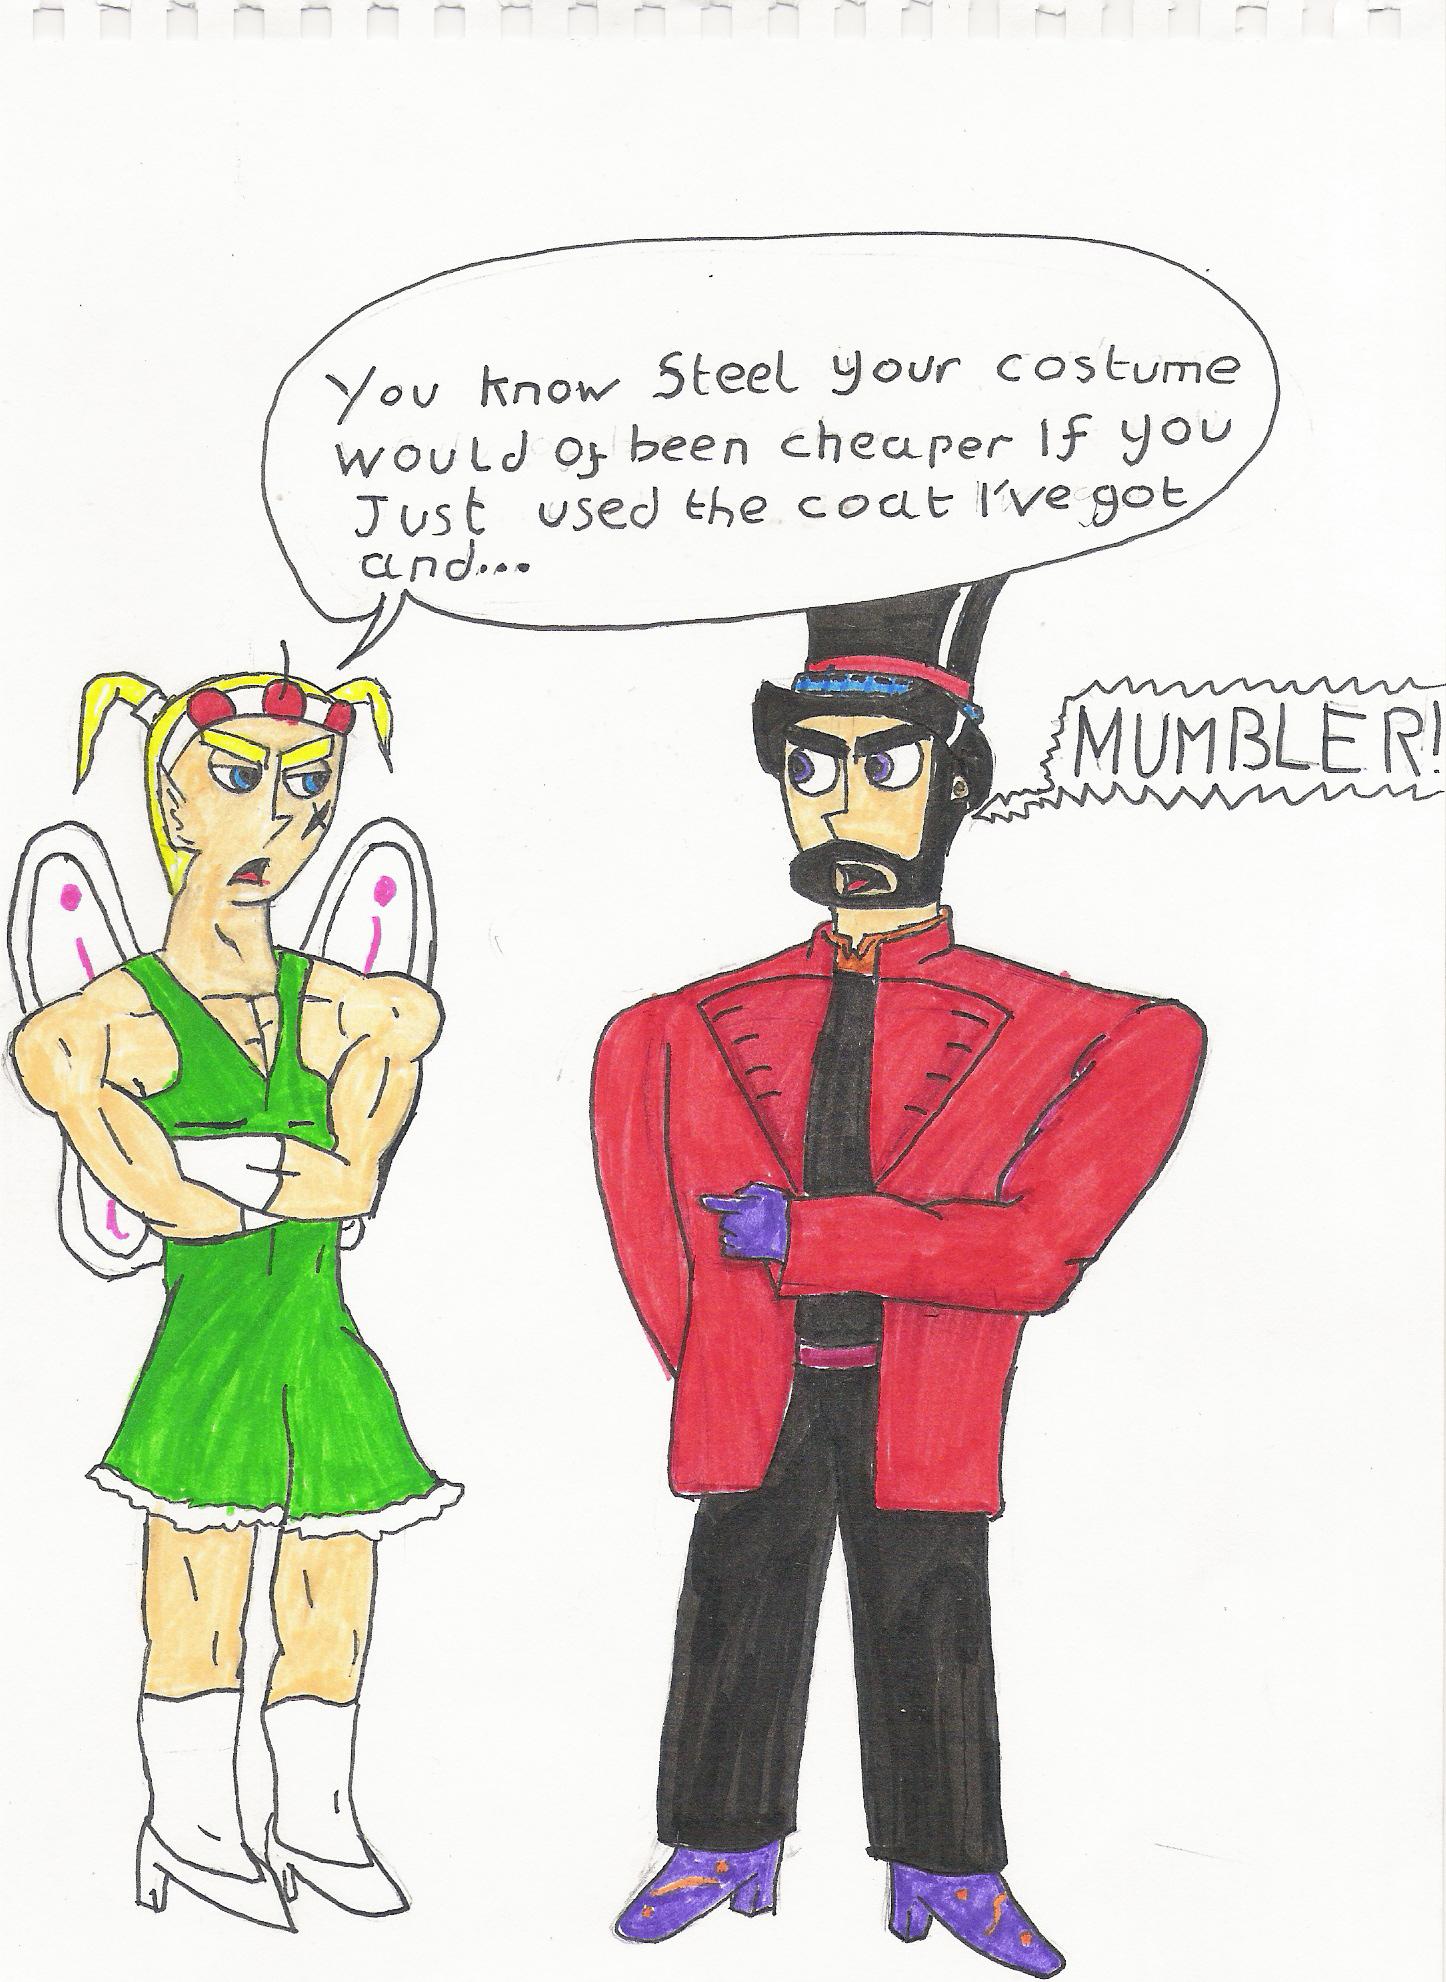 the DSP on halloween : MUMBLER by Luck1